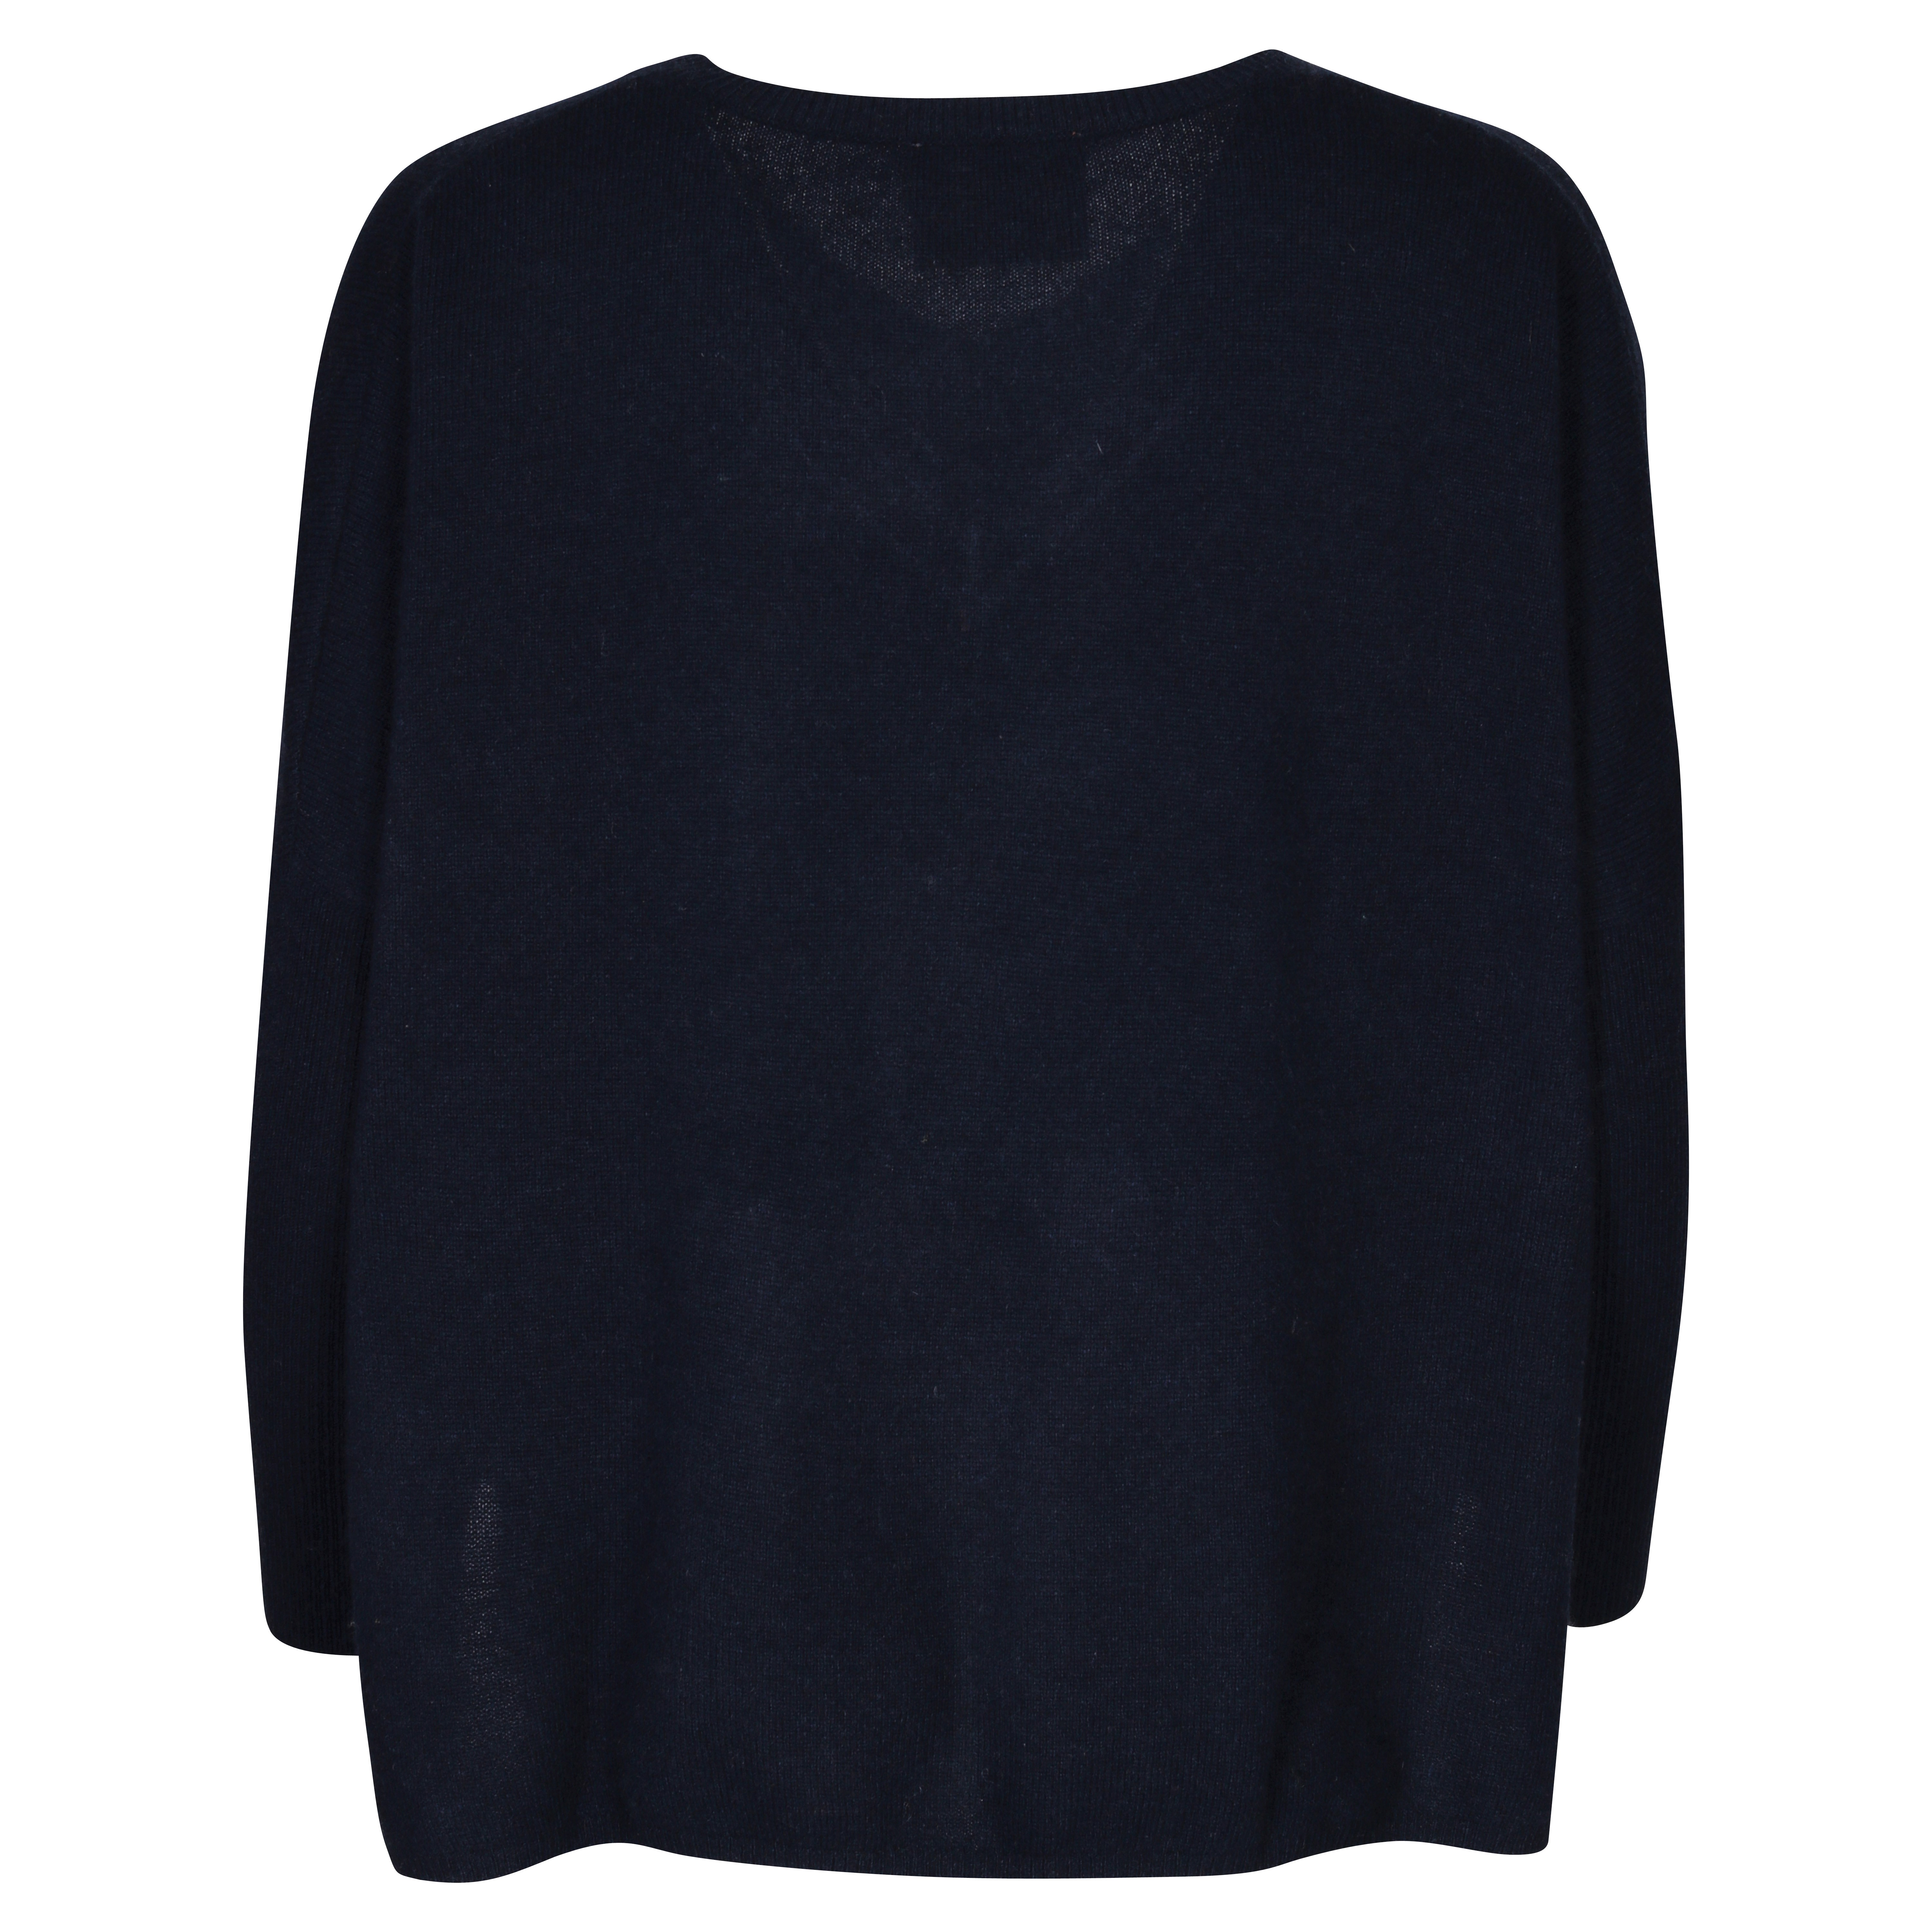 Absolut Cashmere Poncho Sweater in Navy M